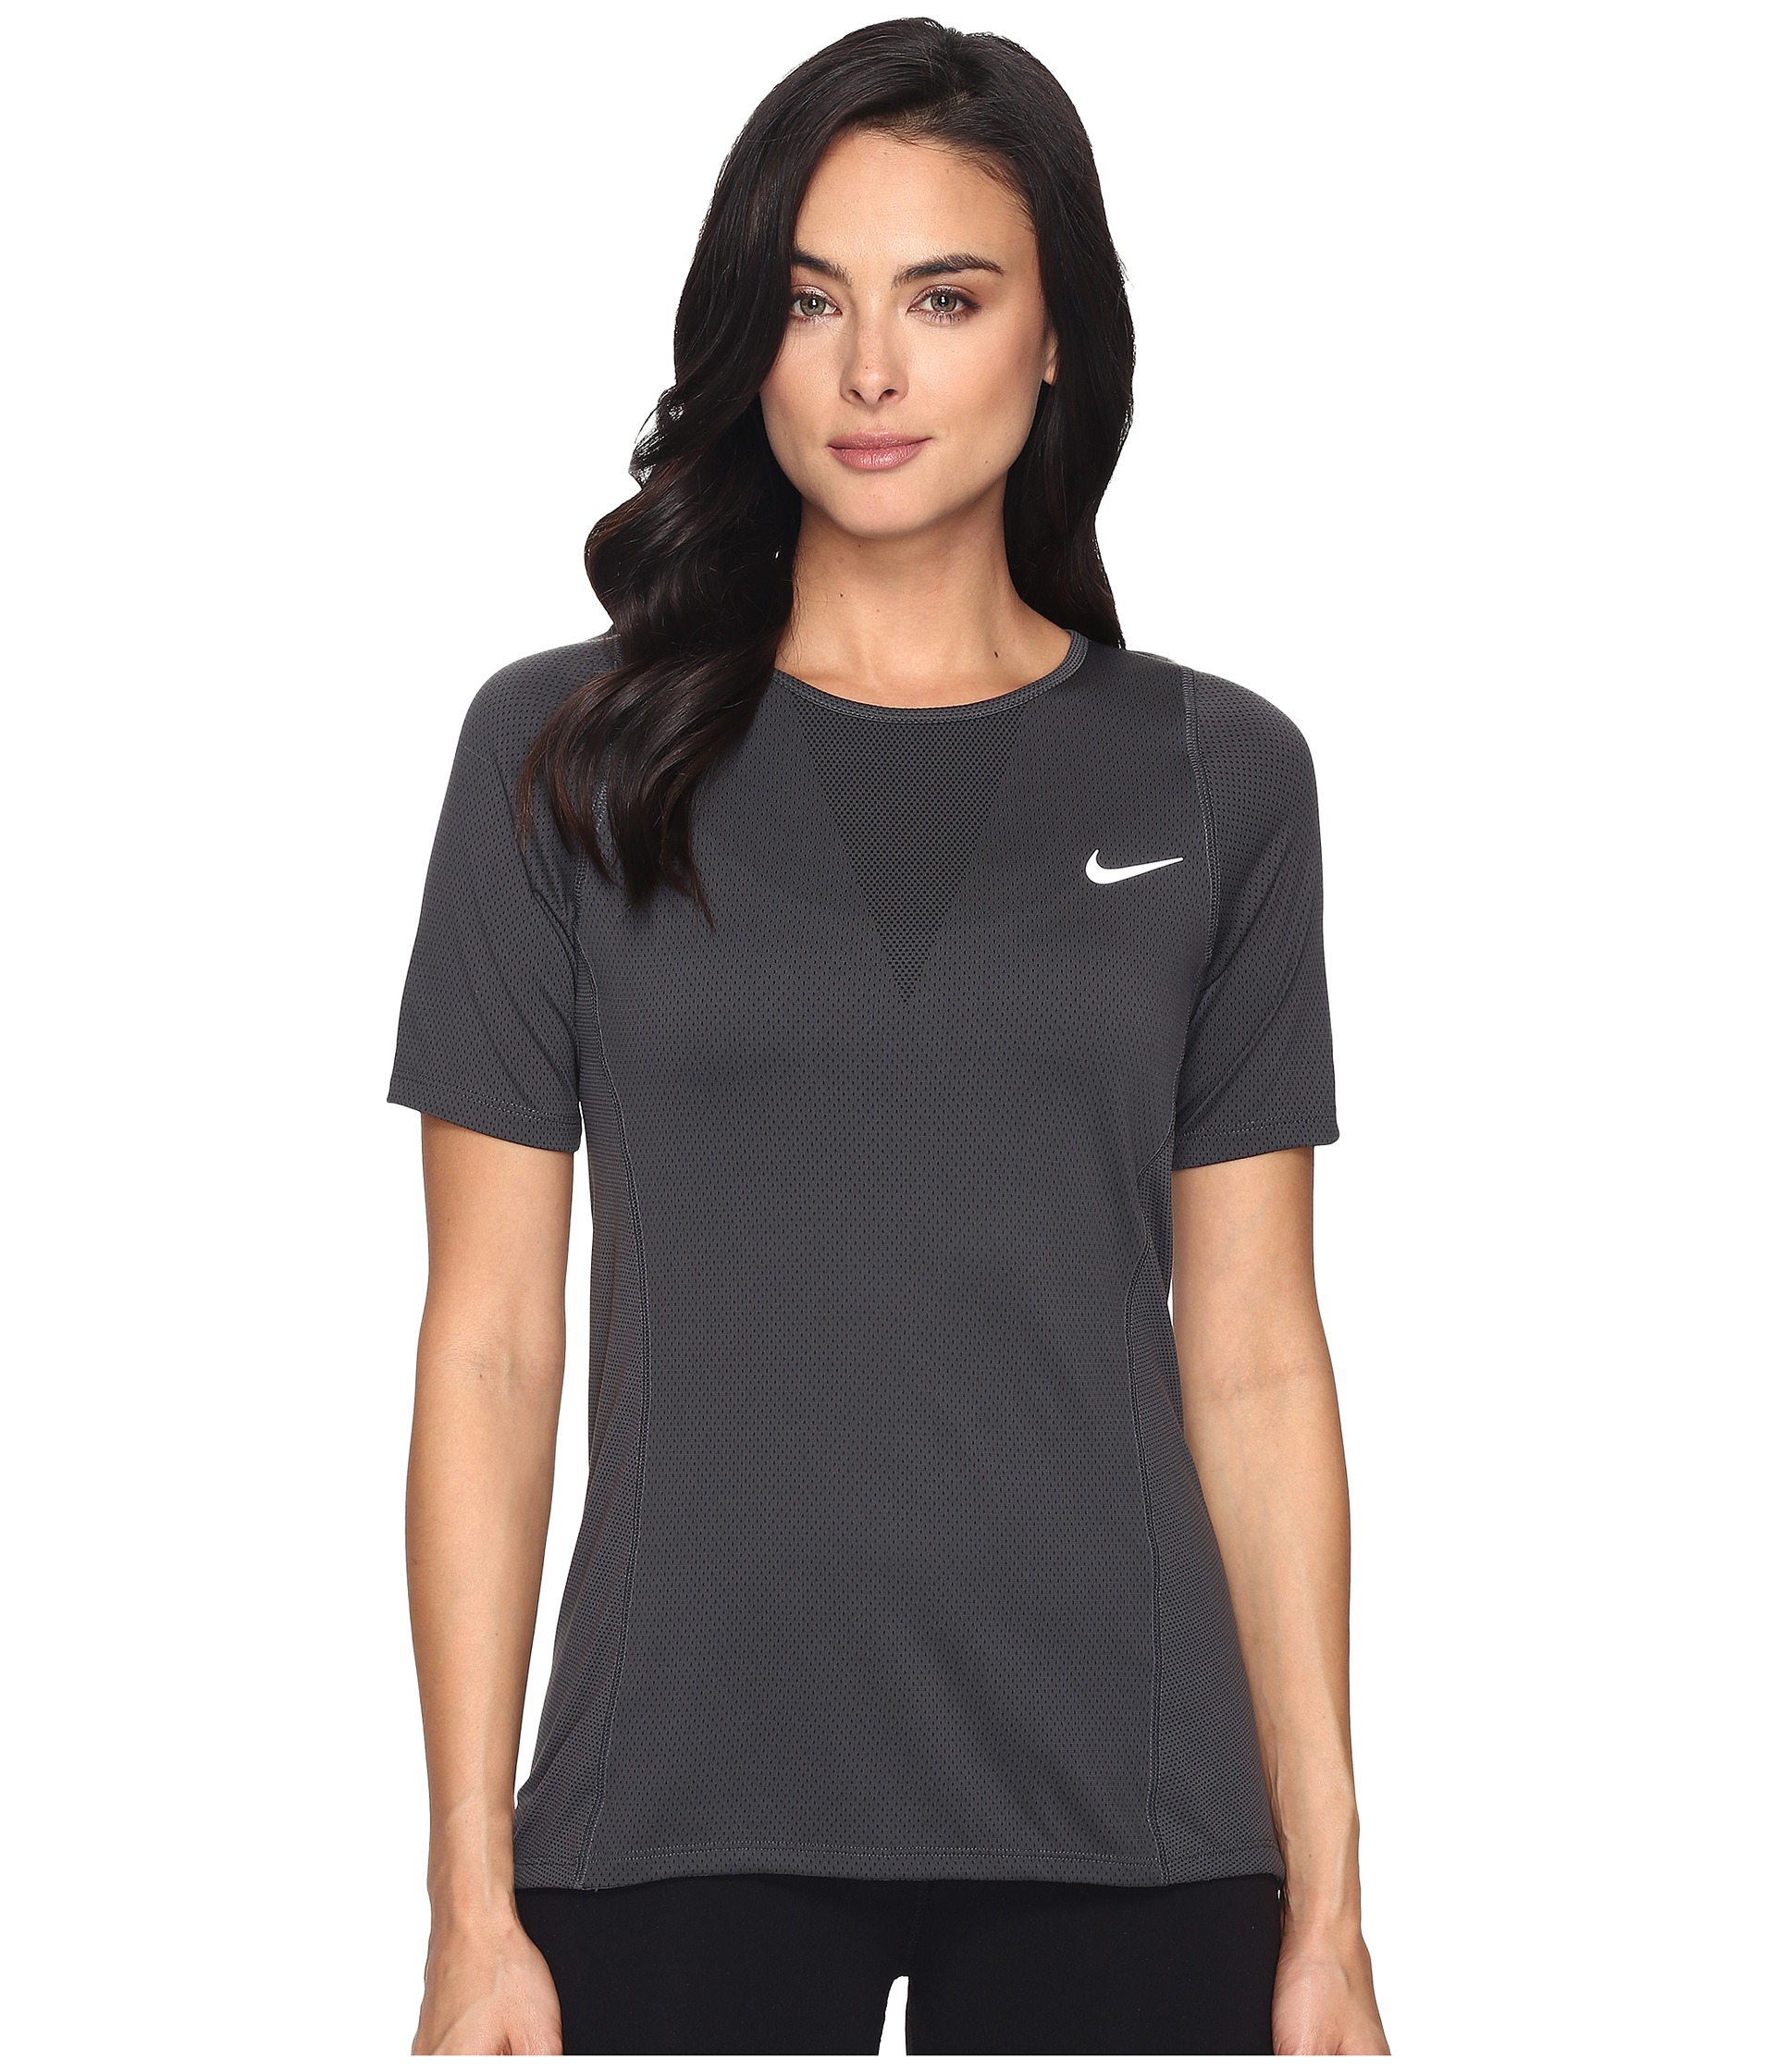 Nike Zonal Cooling Relay Short Sleeve Running Top at Zappos.com